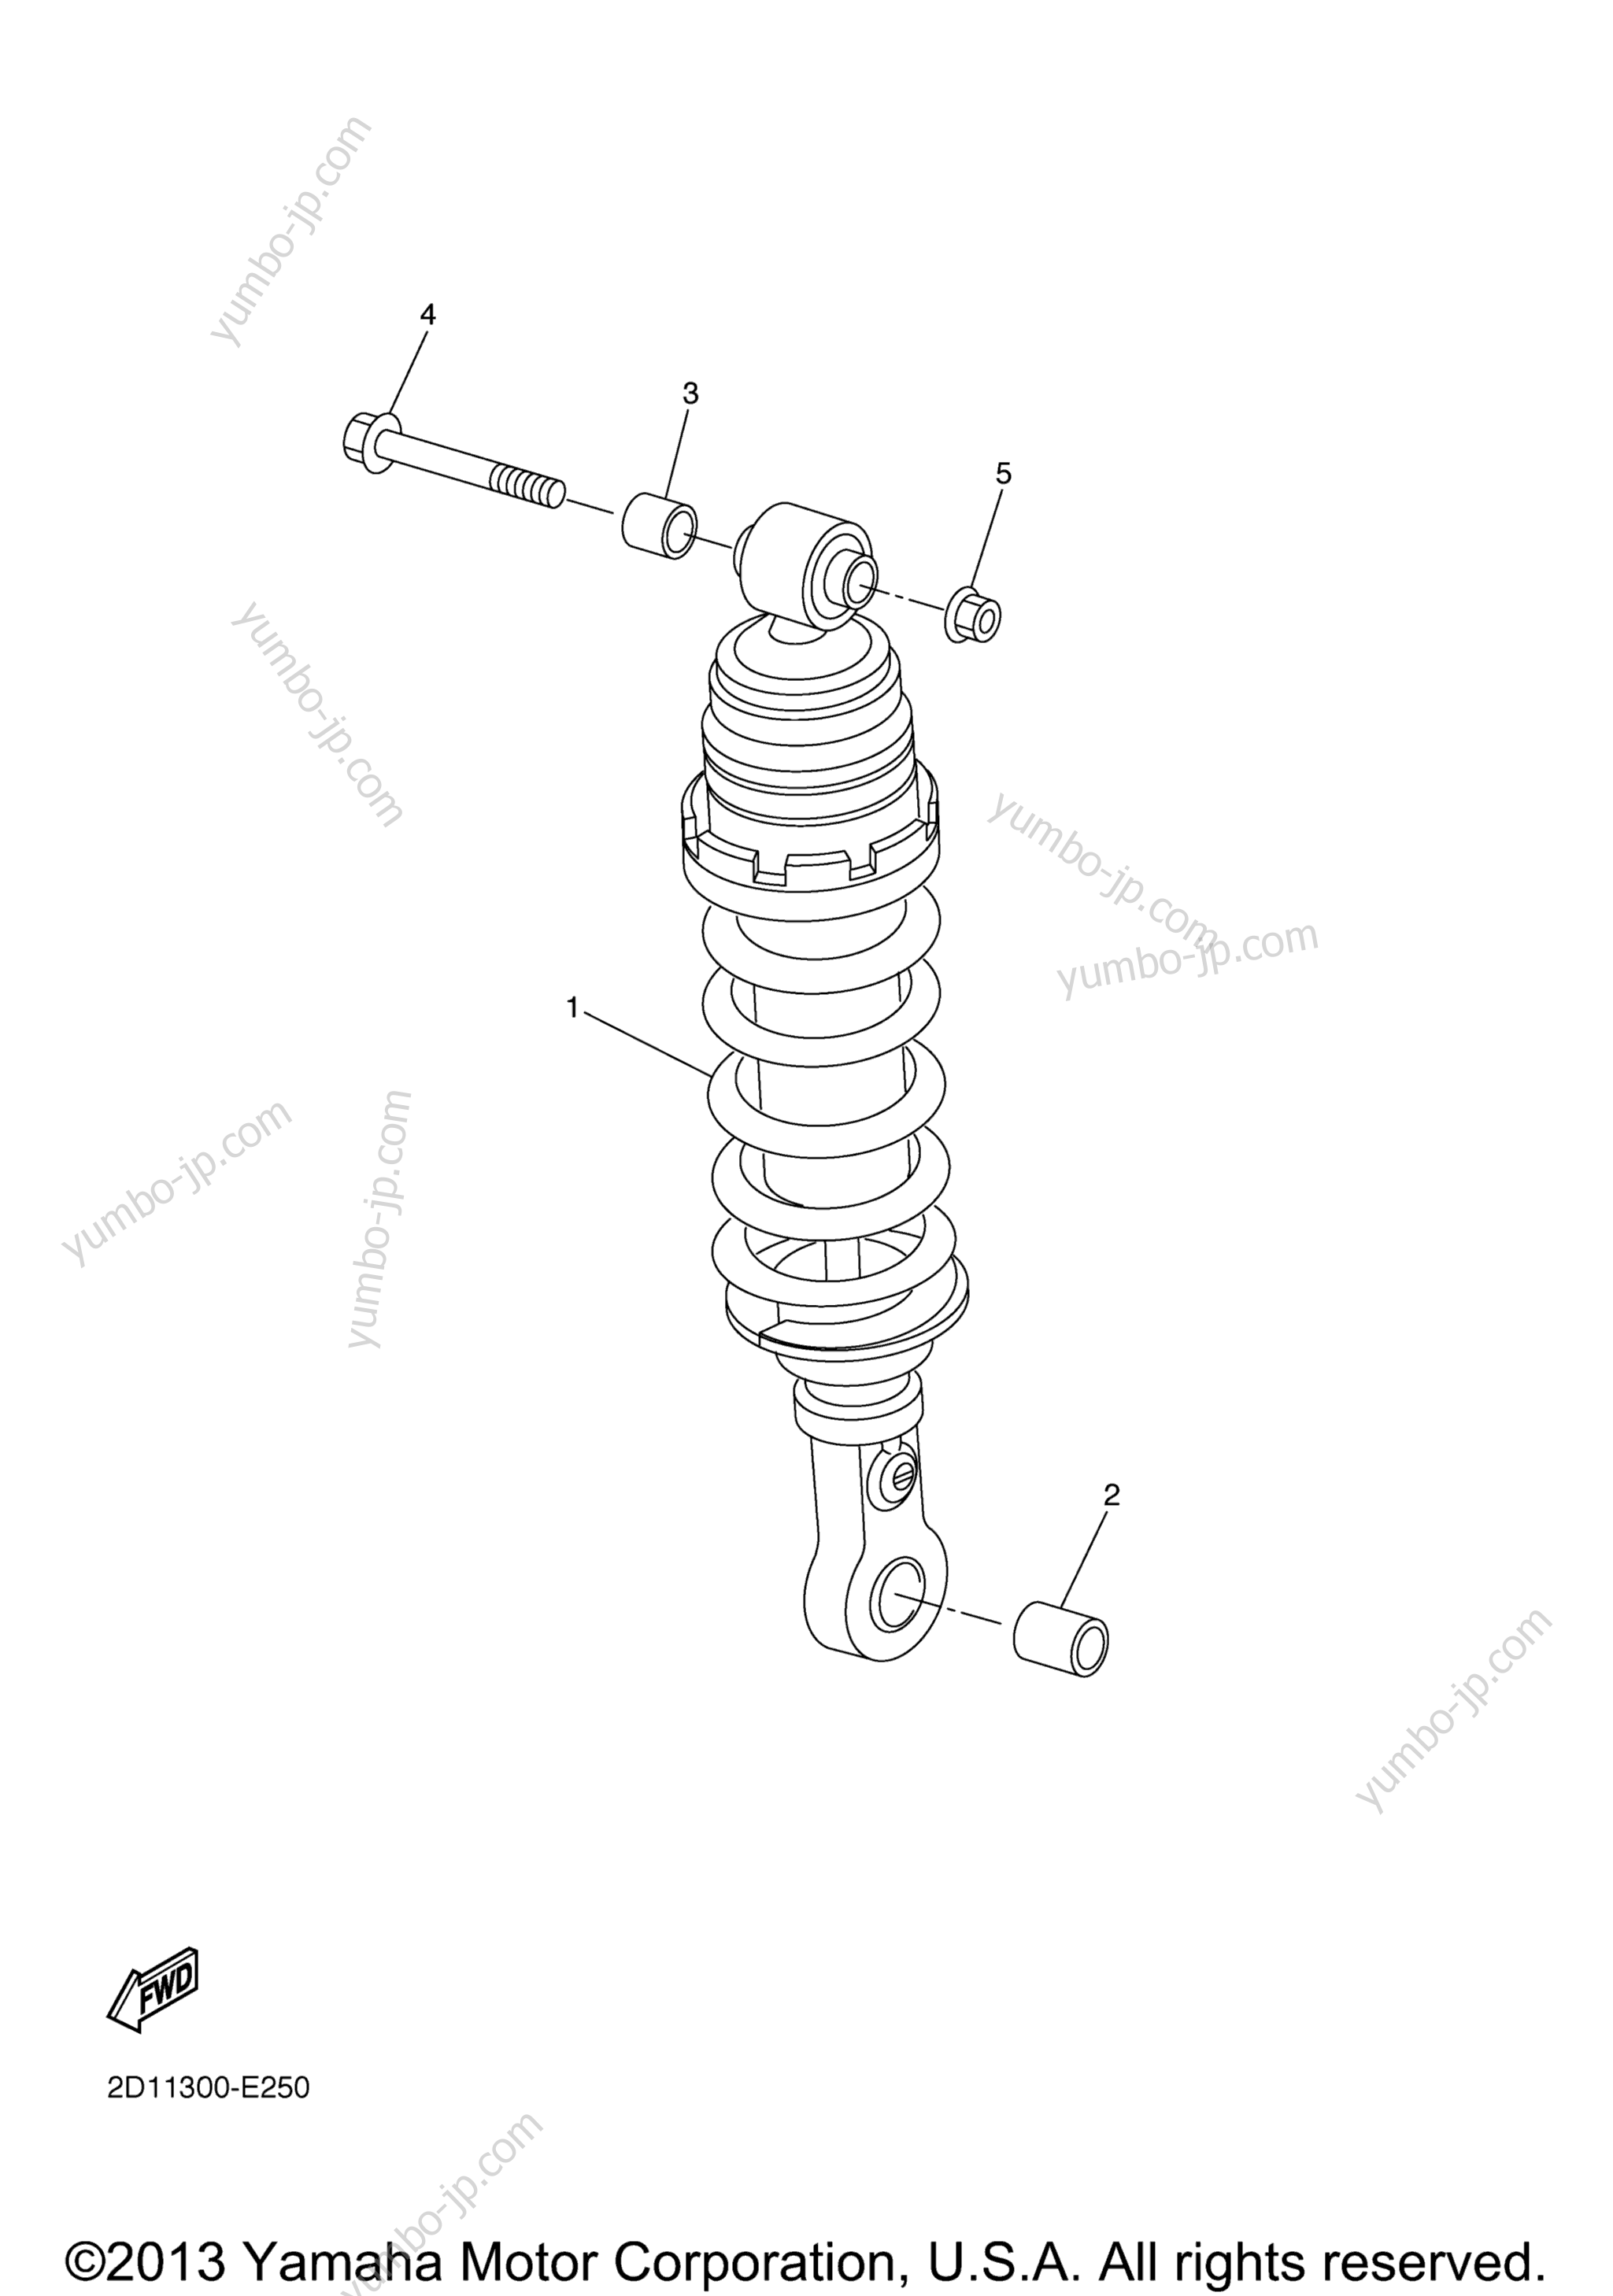 Rear Suspension for motorcycles YAMAHA FZ-1 (FZS10V) 2006 year